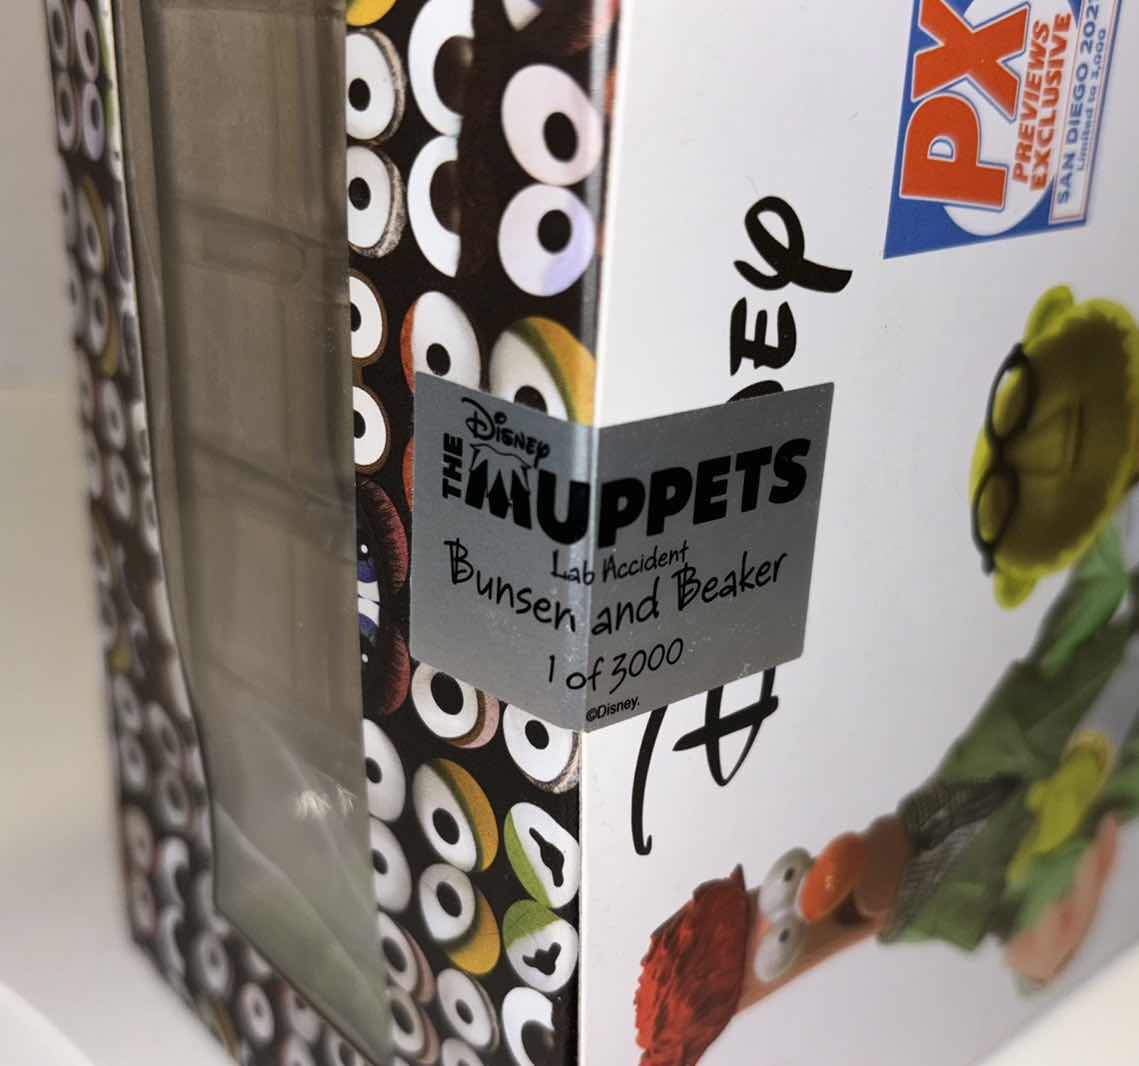 Photo 4 of NEW DIAMOND SELECT TOYS THE MUPPETS ACTION FIGURES, PX PREVIEWS EXCLUSIVE SAN DIEGO 2021 LIMITED EDITION 1 OF 3,000 “BUNSEN AND BEAKER LAB ACCIDENT”